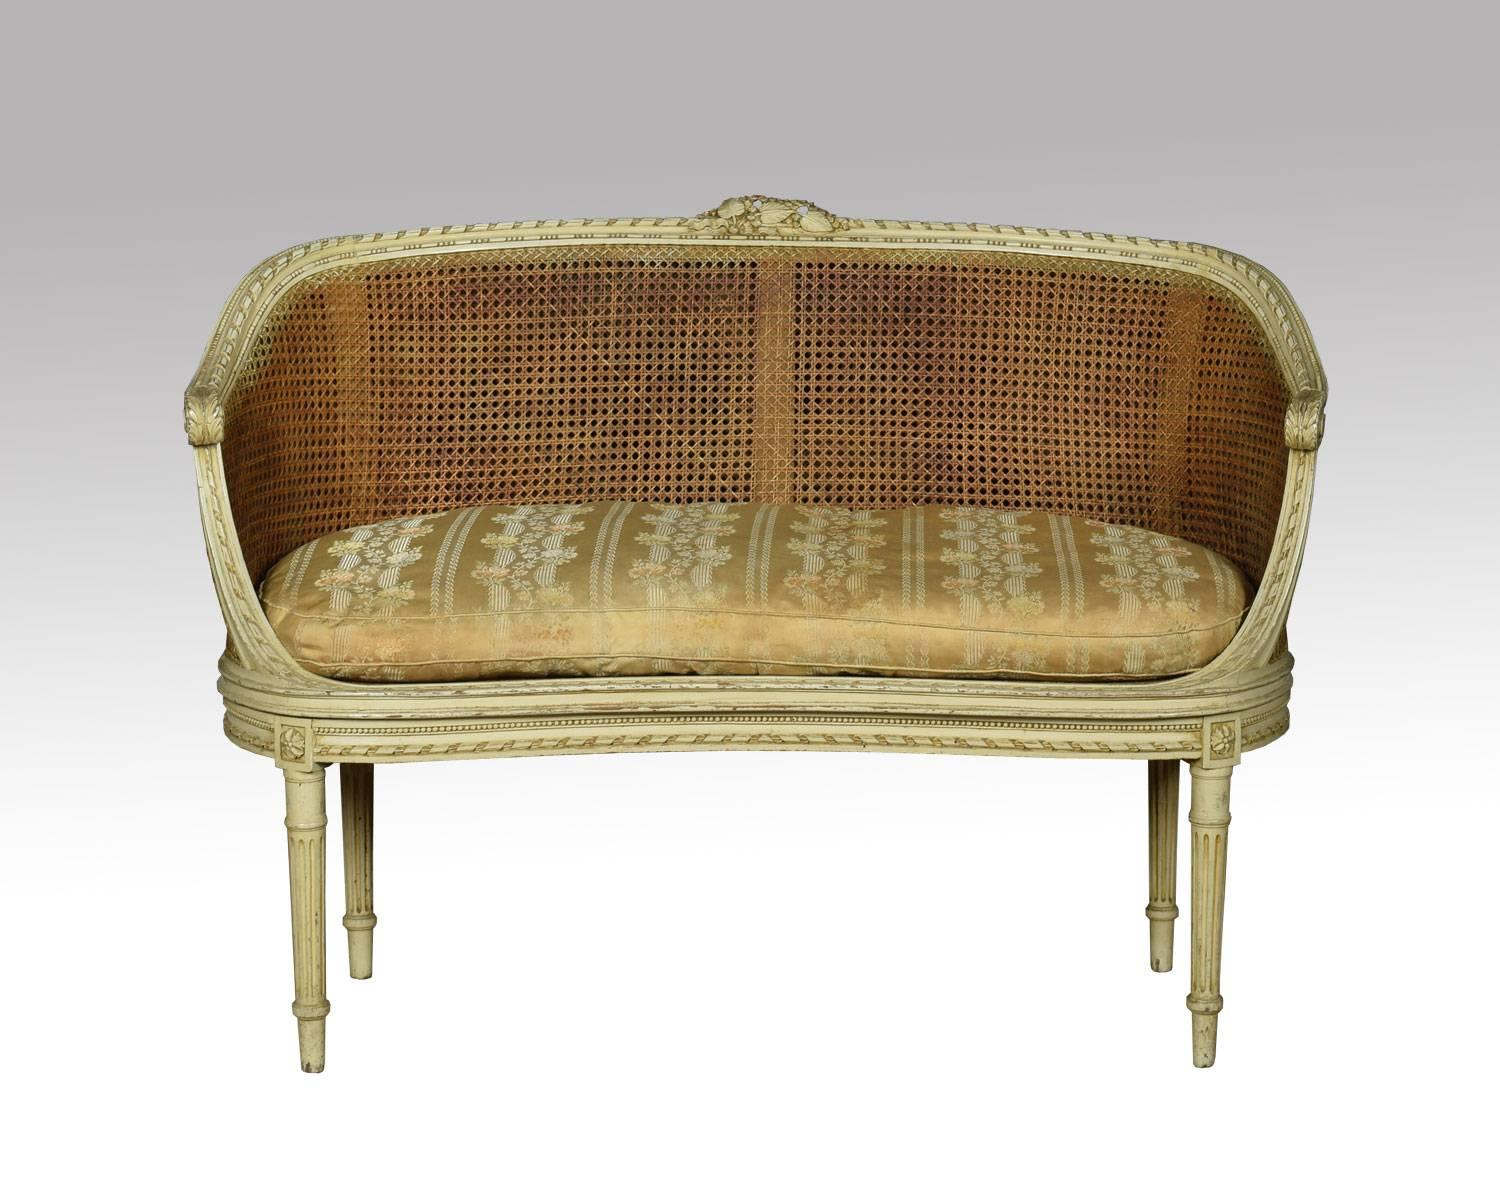 French Louis XVI style canape´ settee, the carved rail in the typical manner of the period with highly detailed ribbon work along the crest among foliage, the frame a repeating motif of detailed leaves. To the scrolling acanthus caped arms, flanking